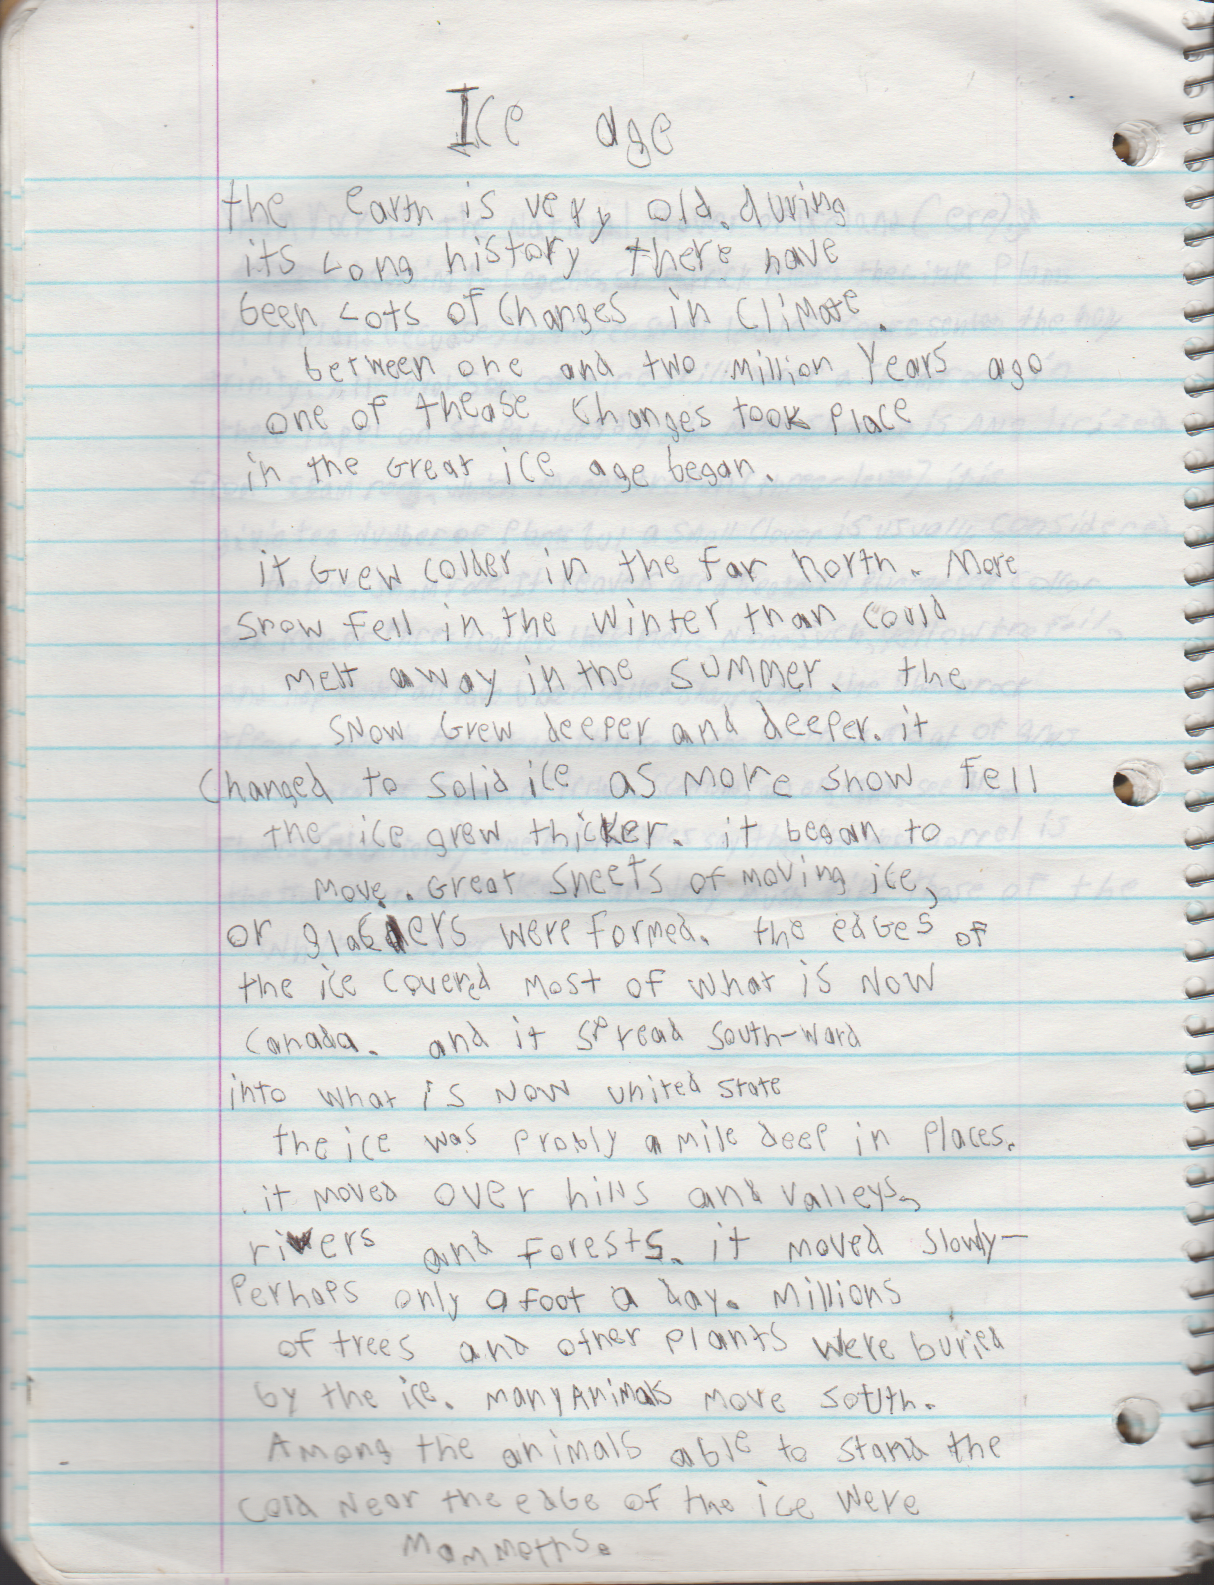 1996-08-18 - Saturday - 11 yr old Joey Arnold's School Book, dates through to 1998 apx, mostly 96, Writings, Drawings, Etc-022.png